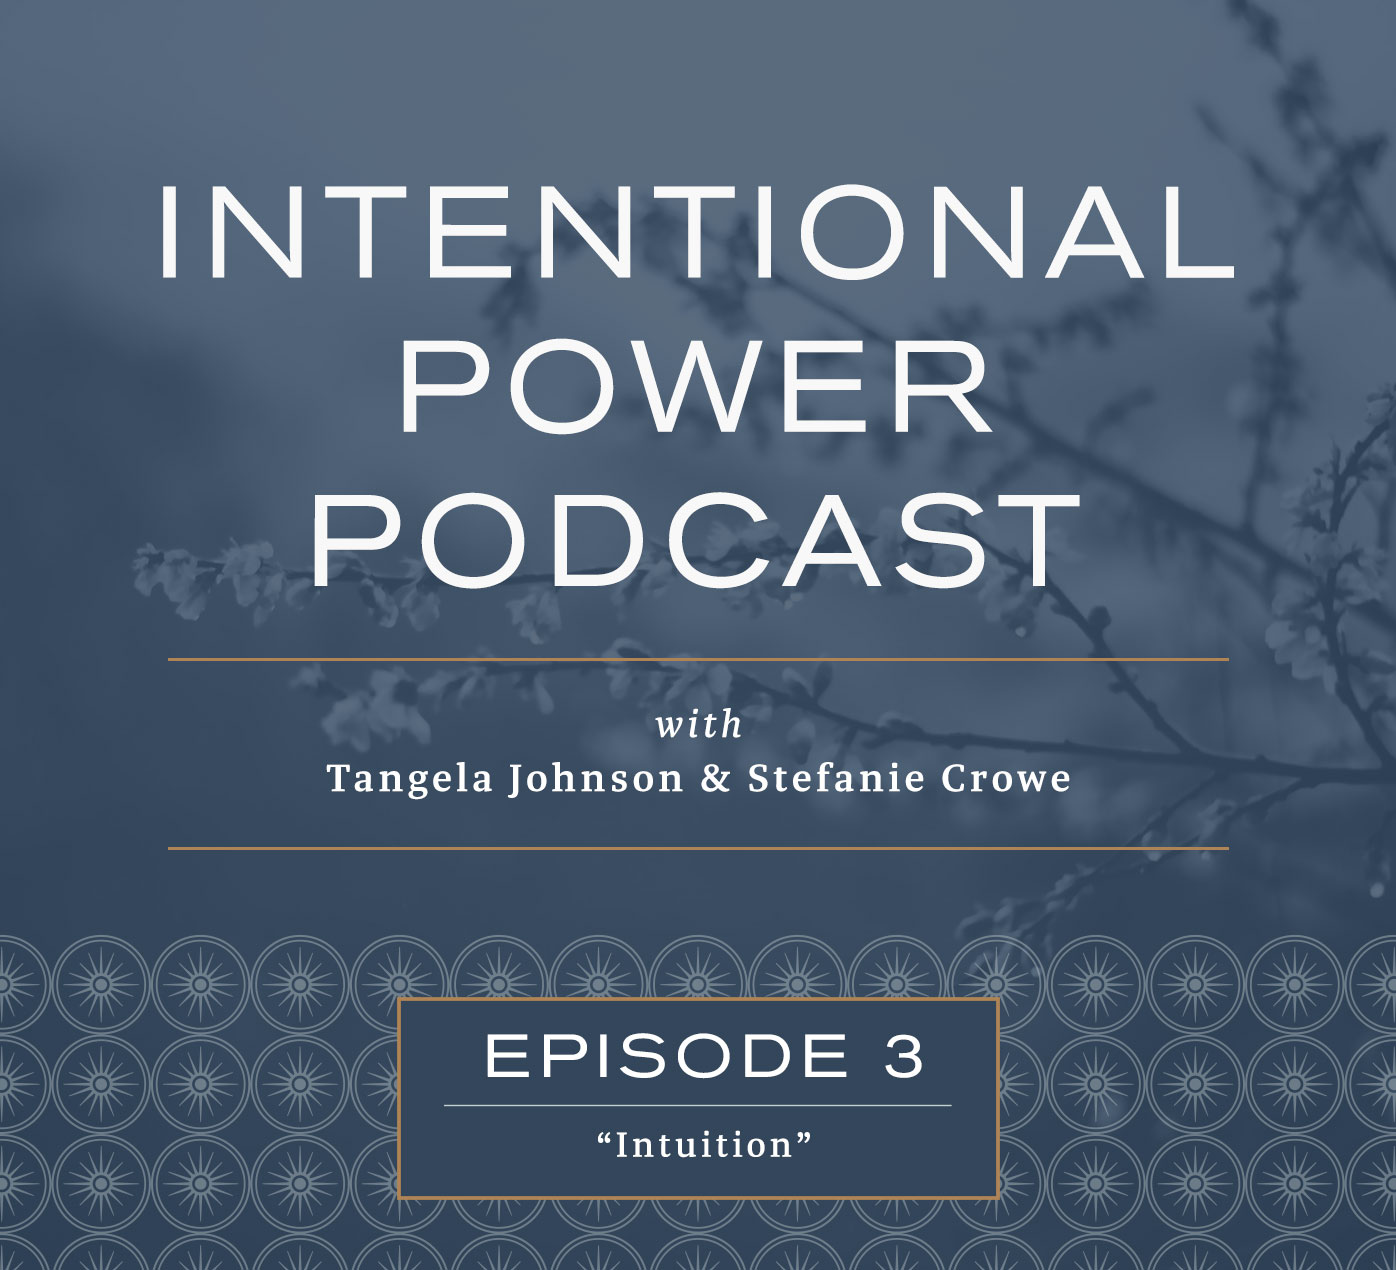 Intentional Power Podcast - Episode 3: Intuition